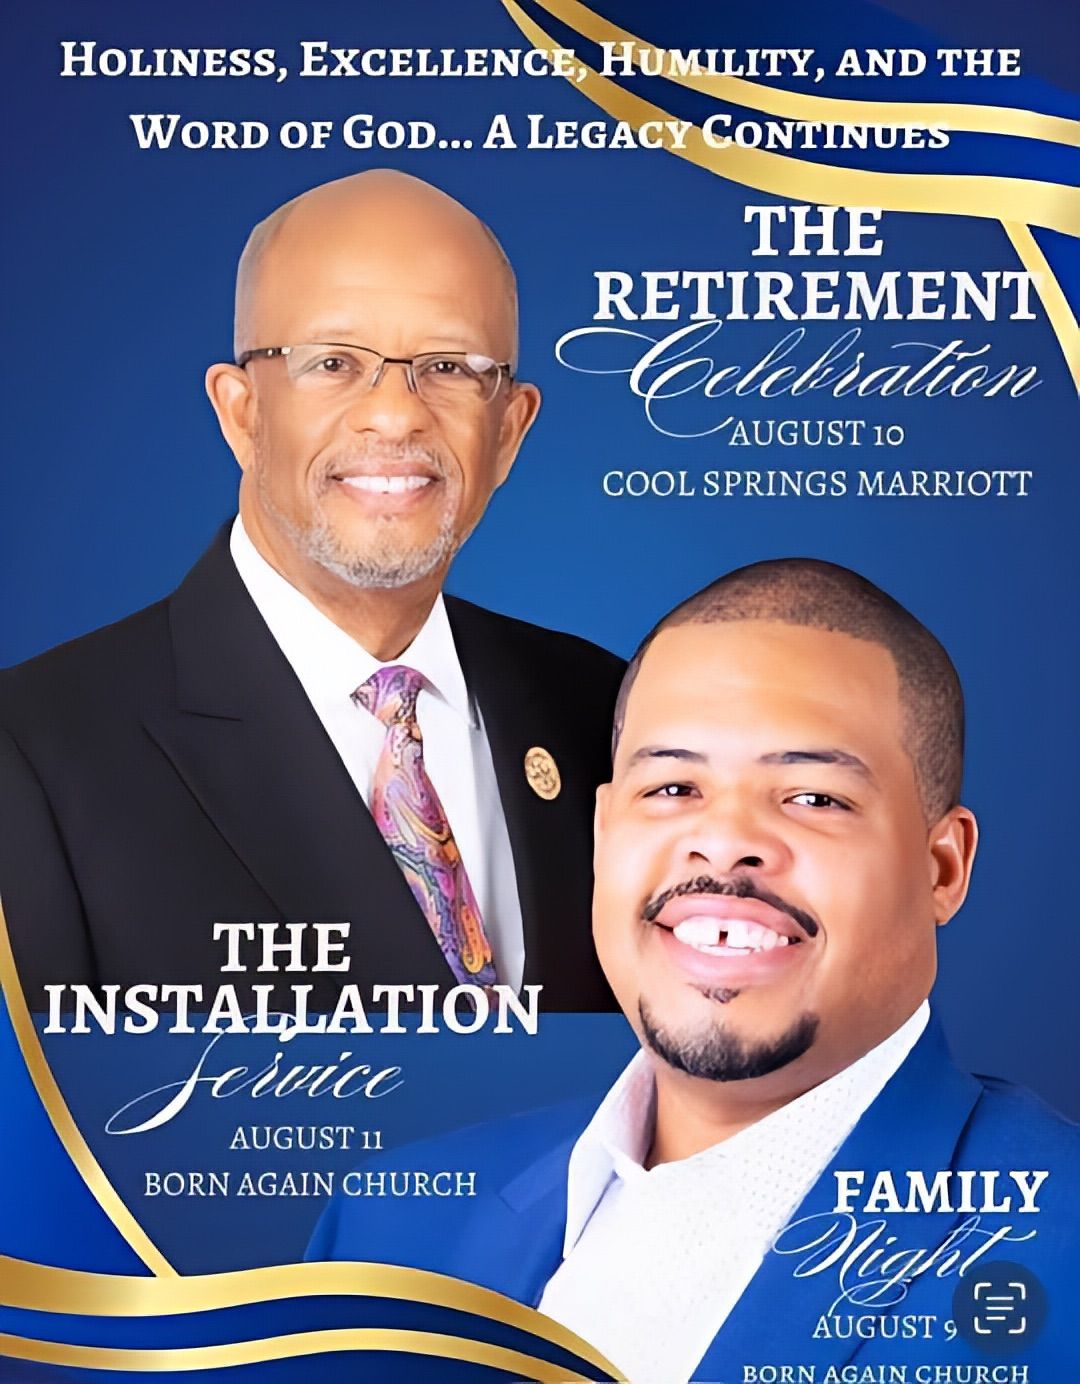 The Retirement Celebration and Installation Service